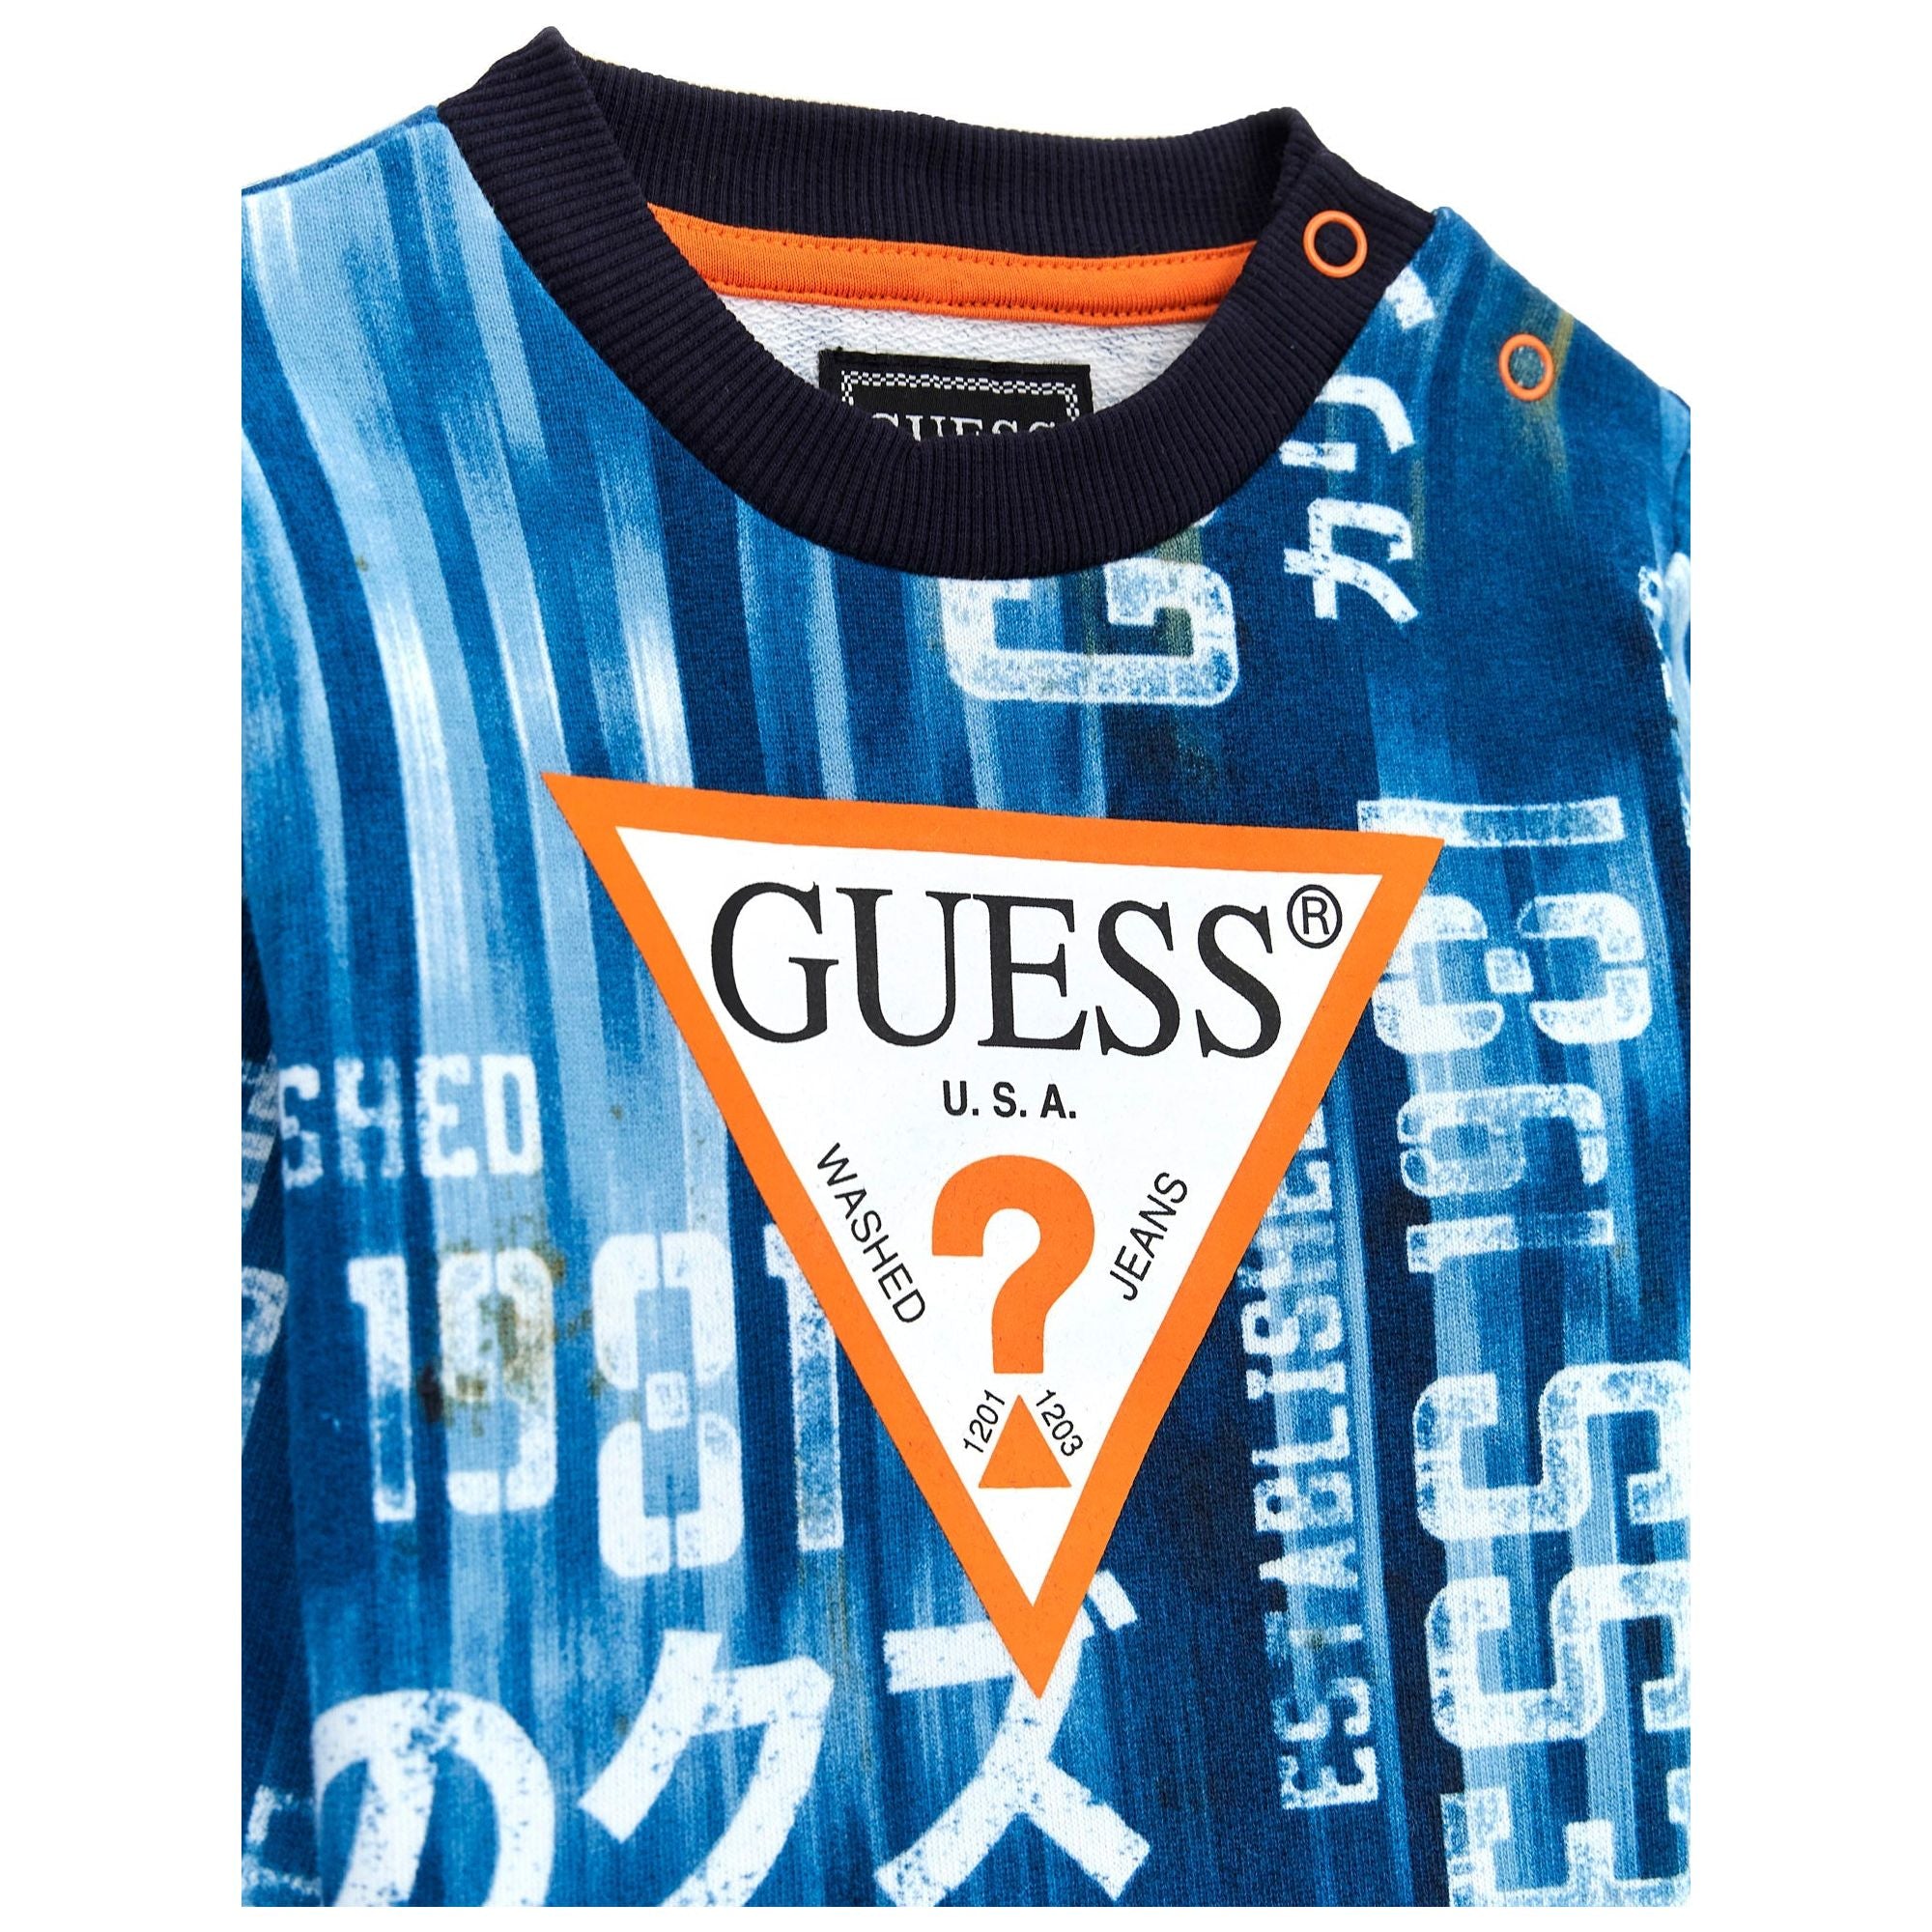 Guess - Toddler Boys Tee in Blue Print